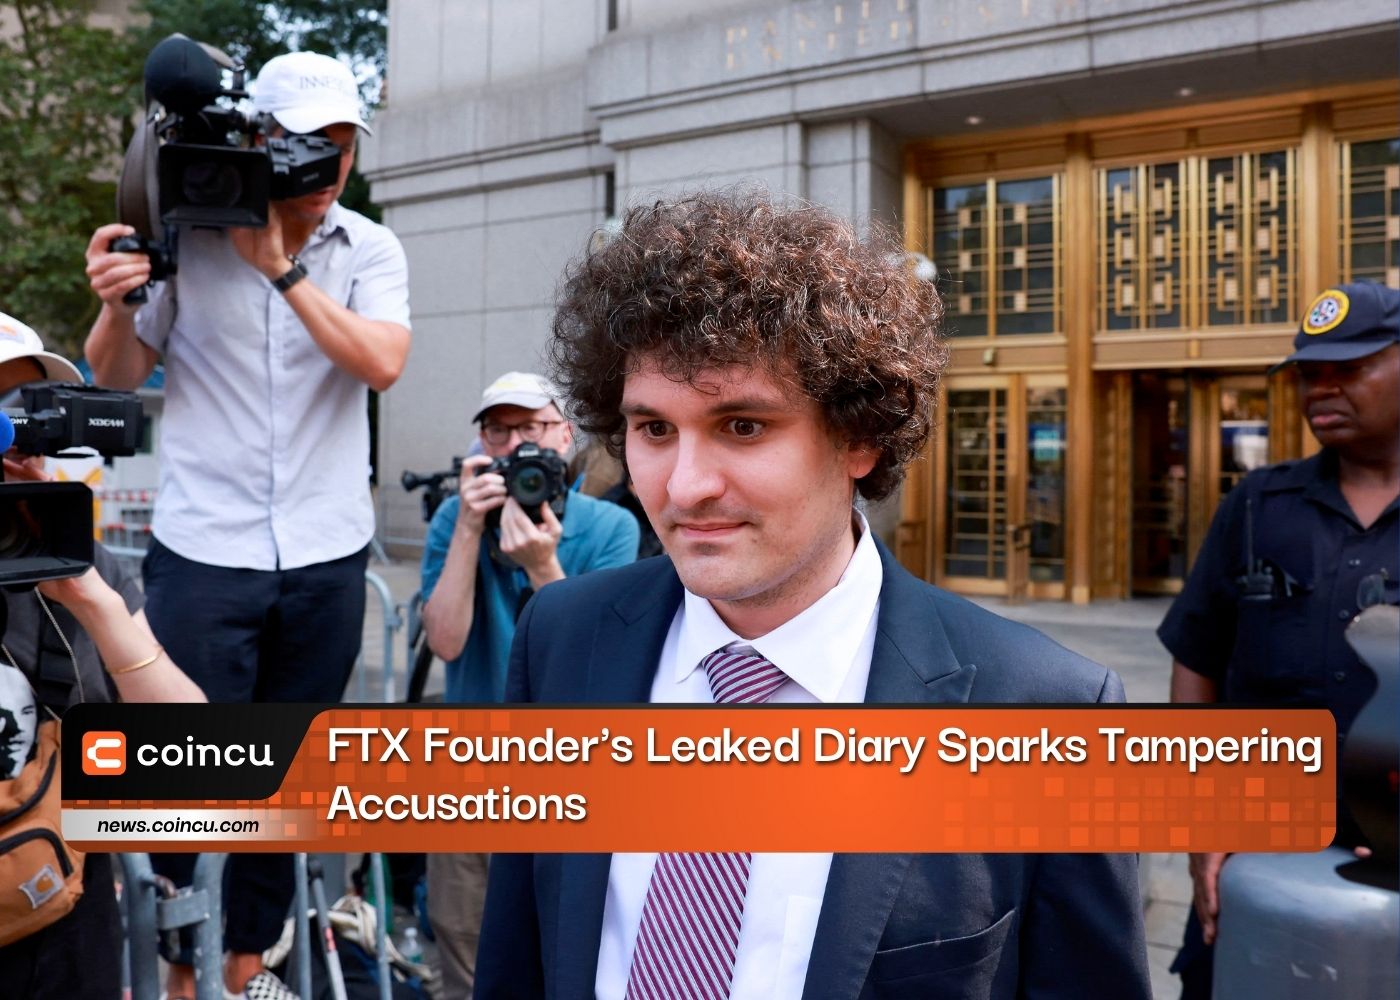 FTX Founder's Leaked Diary Sparks Tampering Accusations